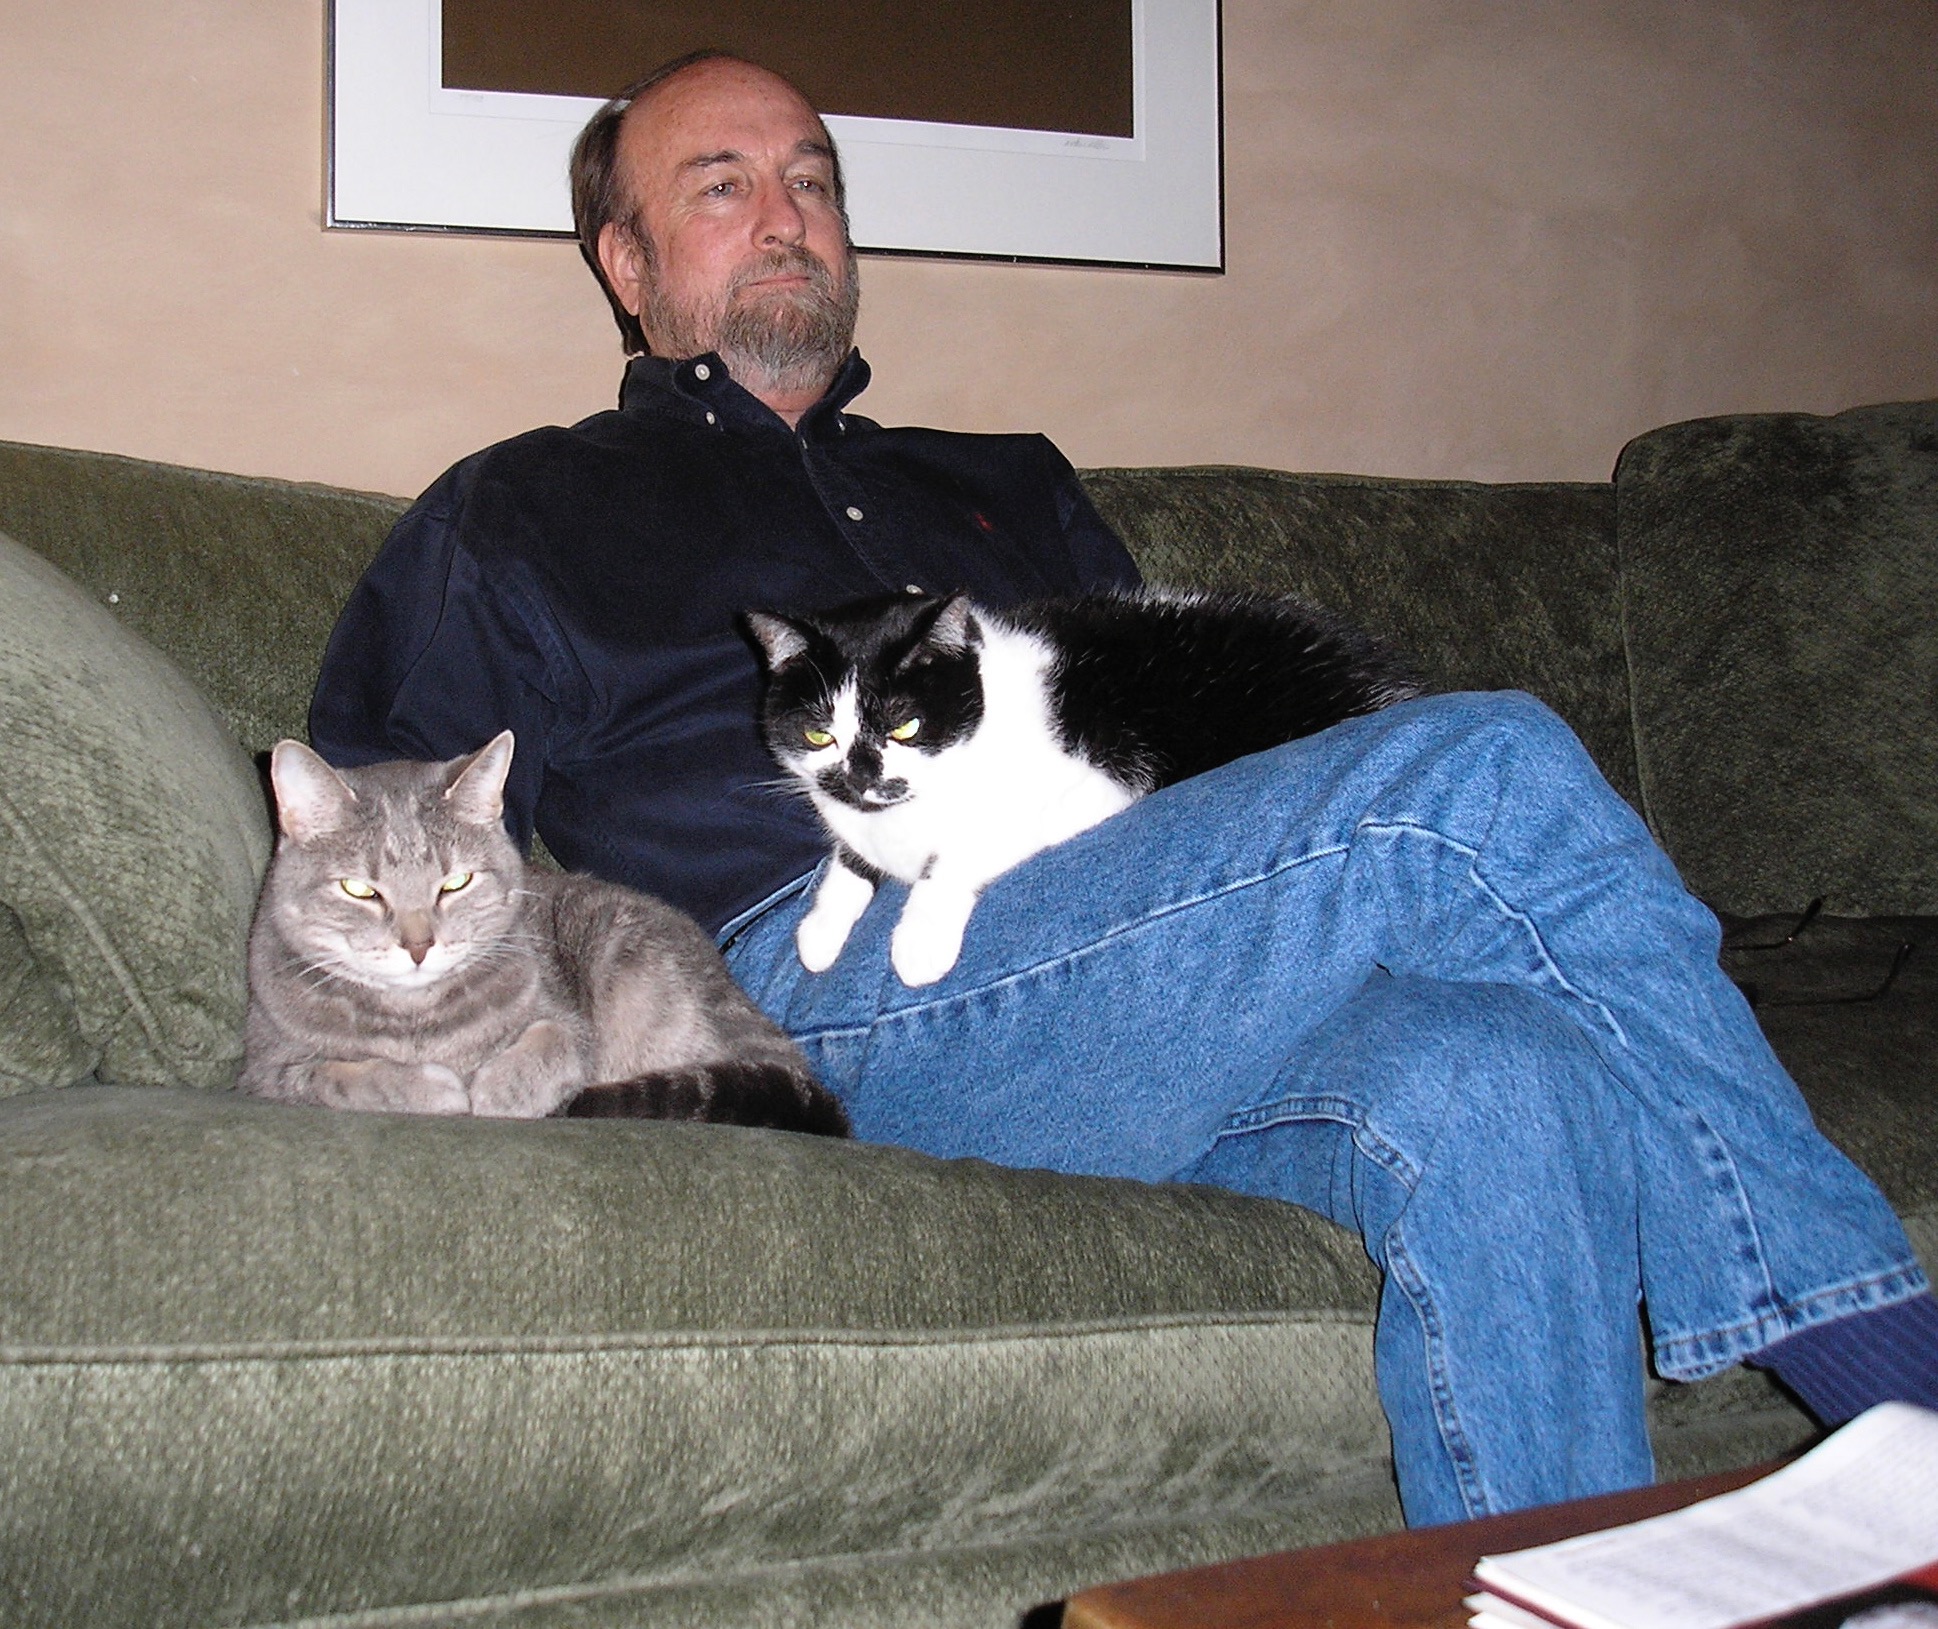 Bill with the two cats